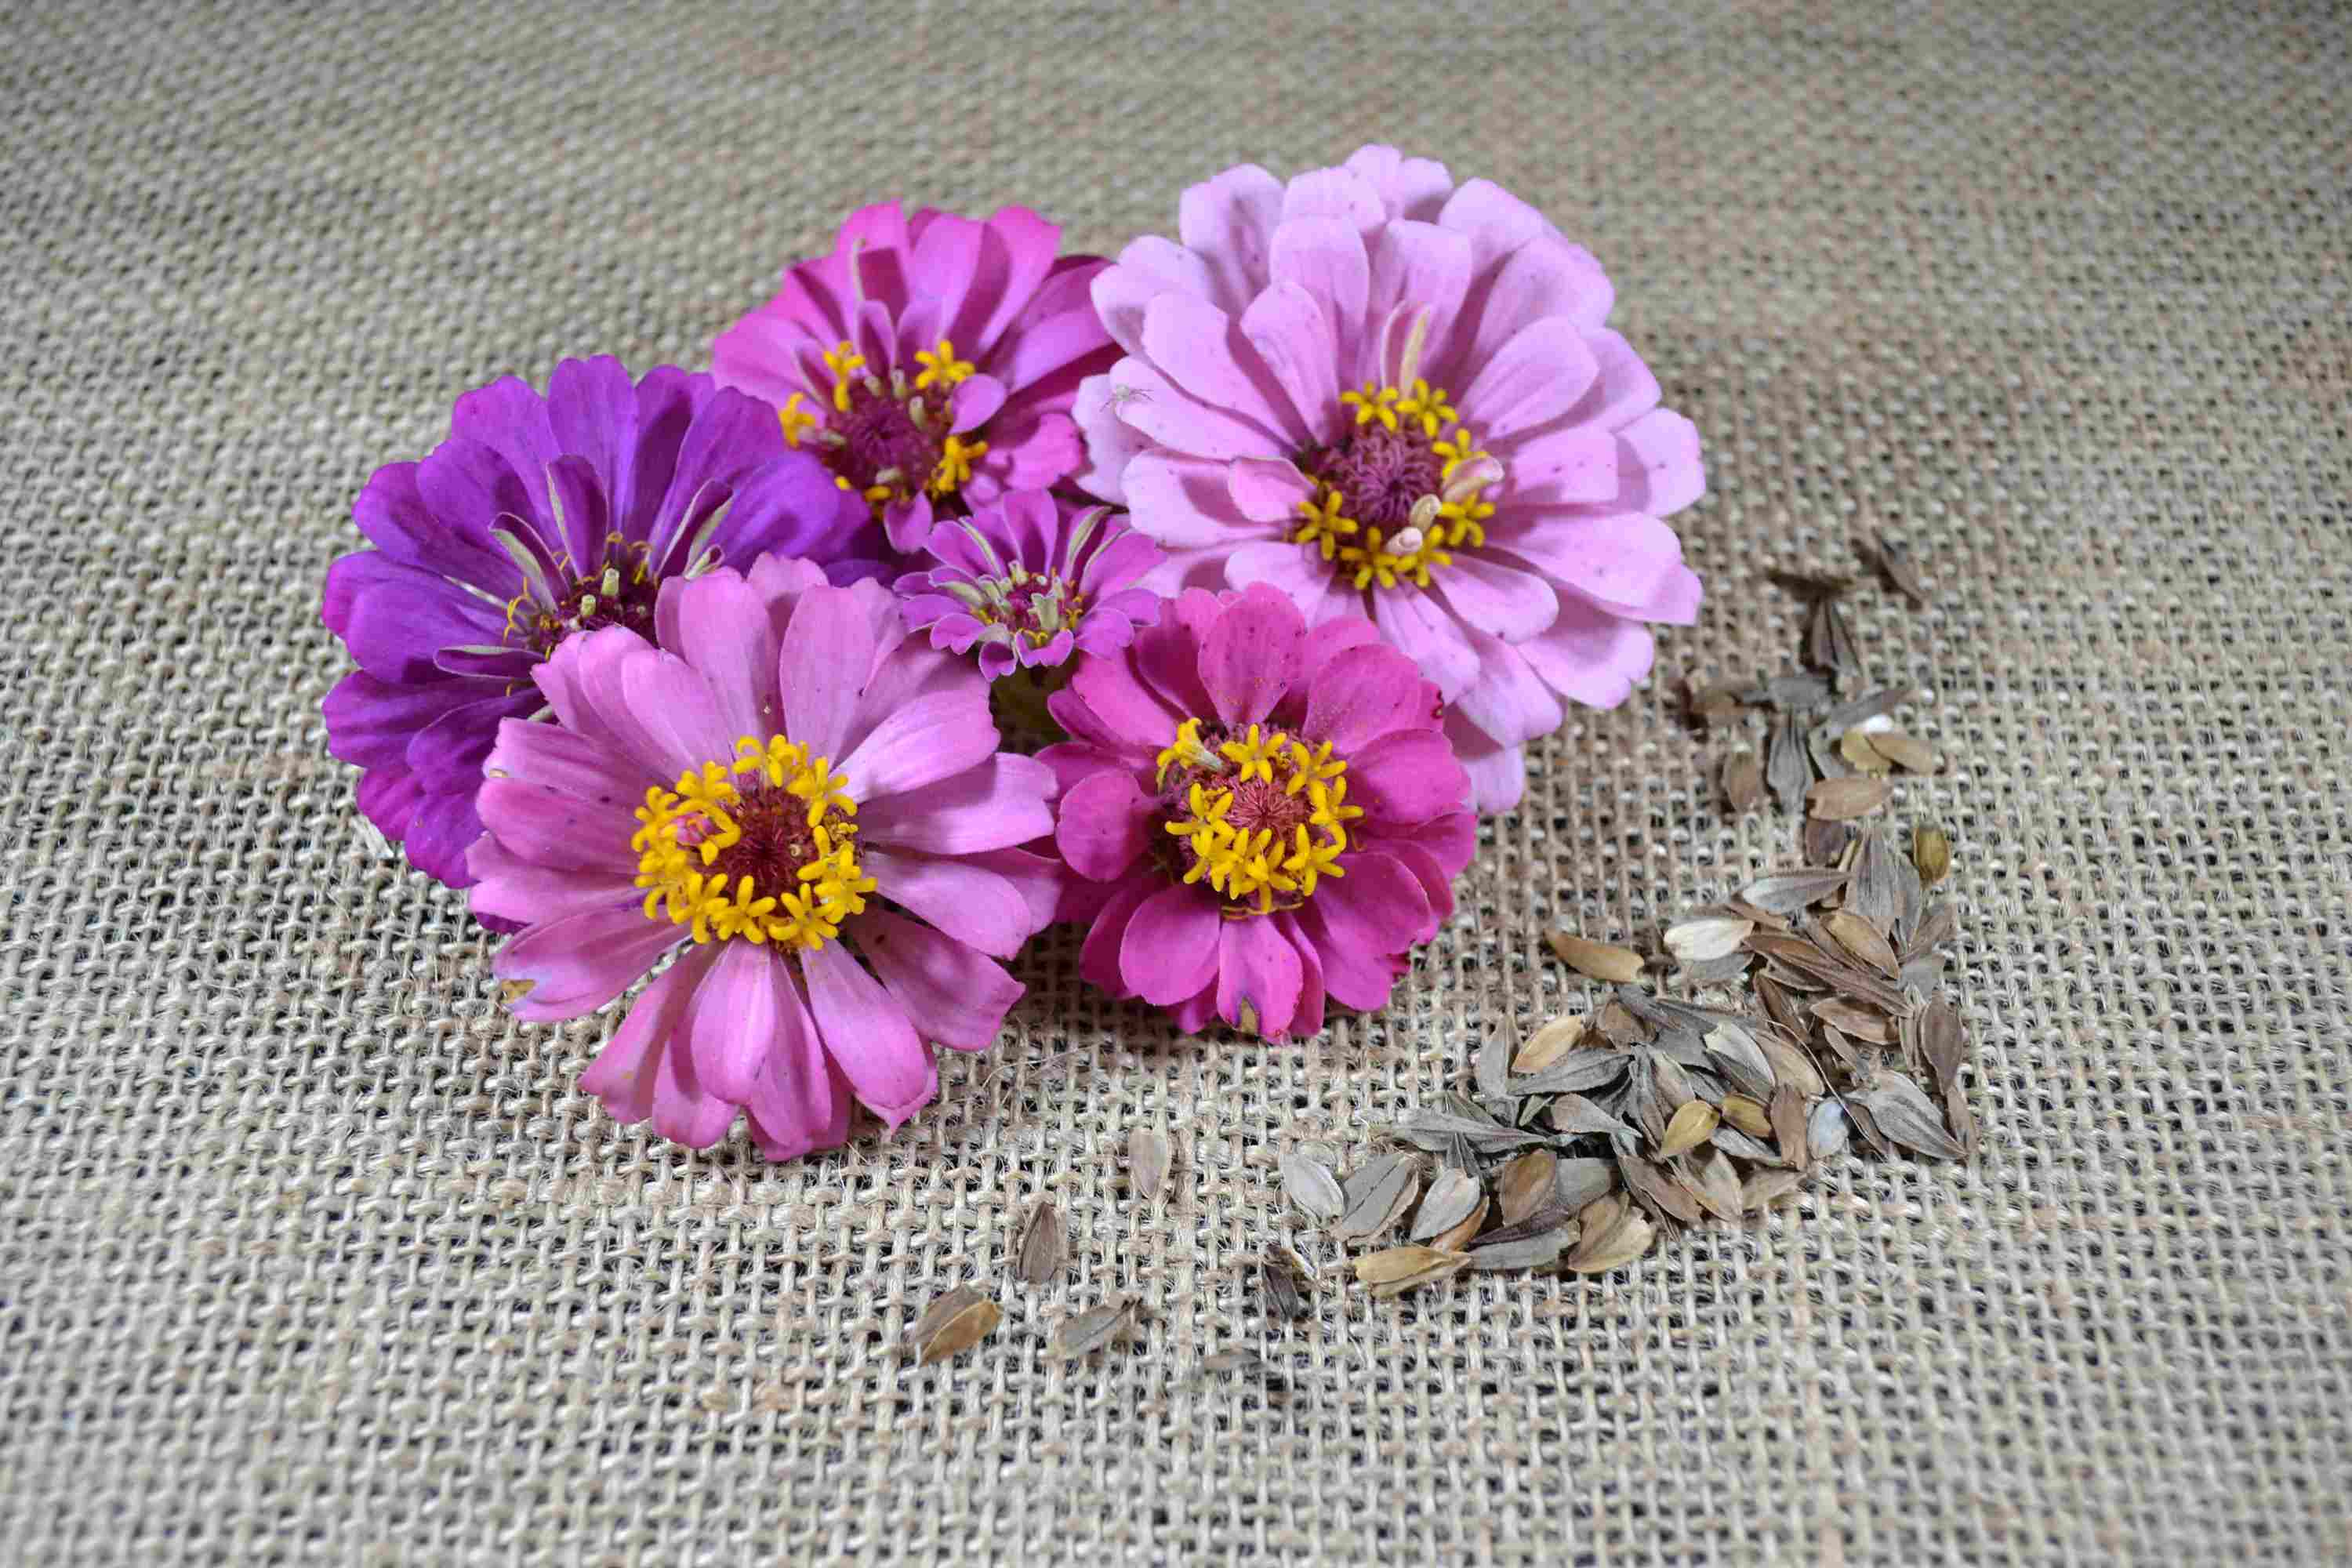 How To Get Seeds From Zinnias